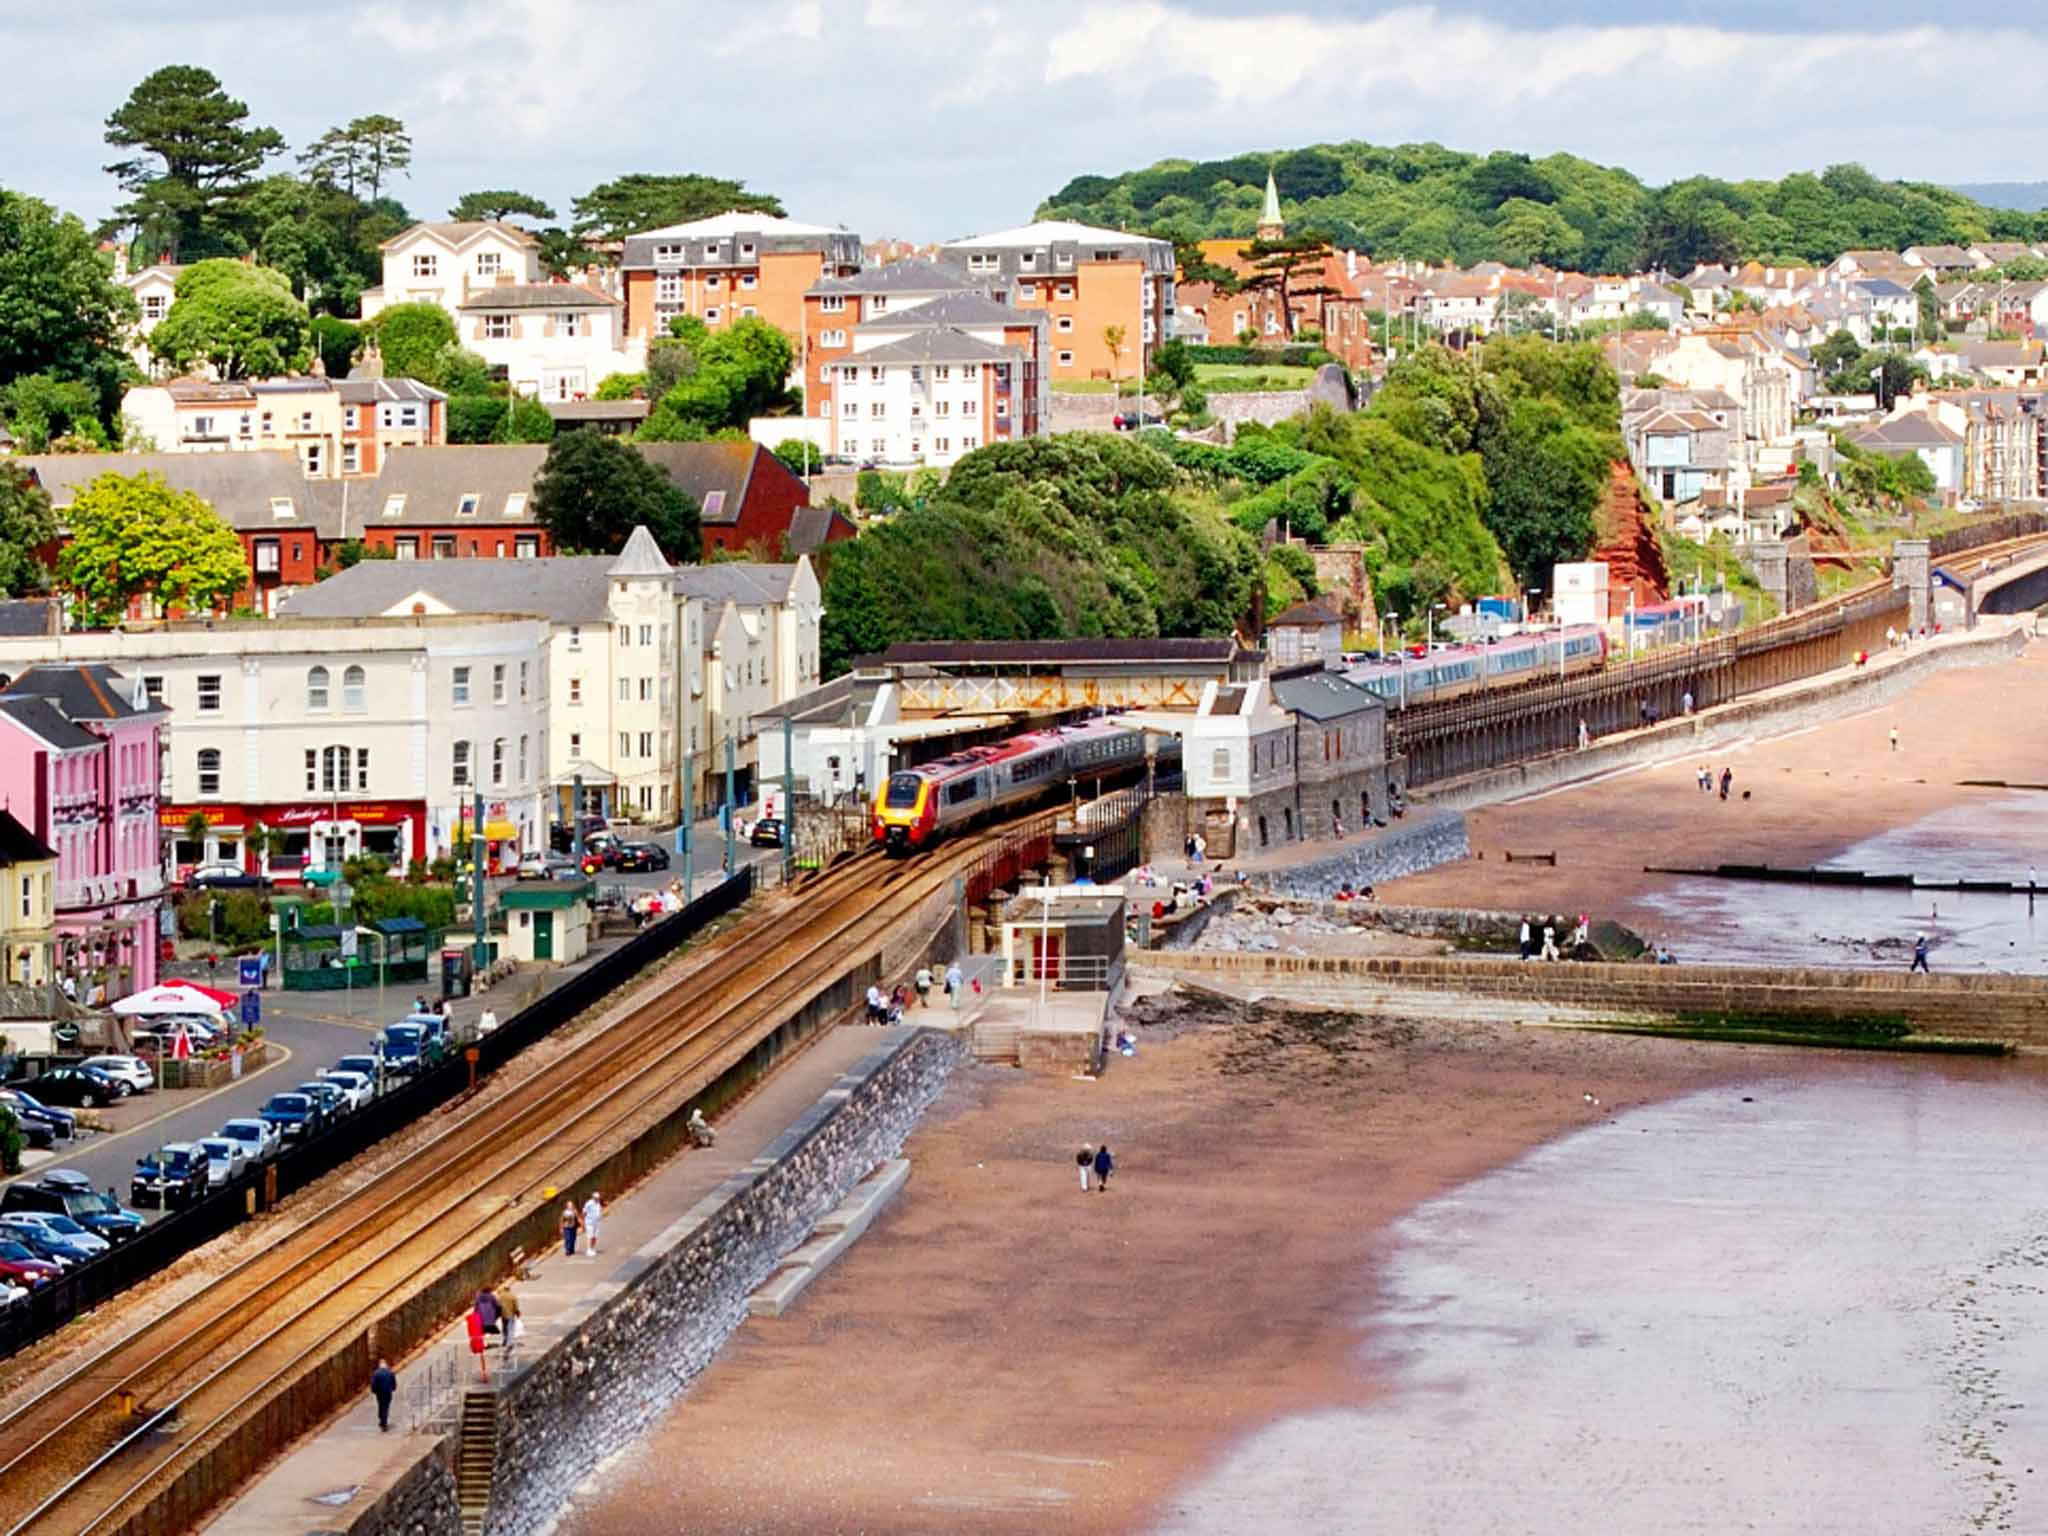 Dawlish, in Devon, is served by direct trains from Dundee 